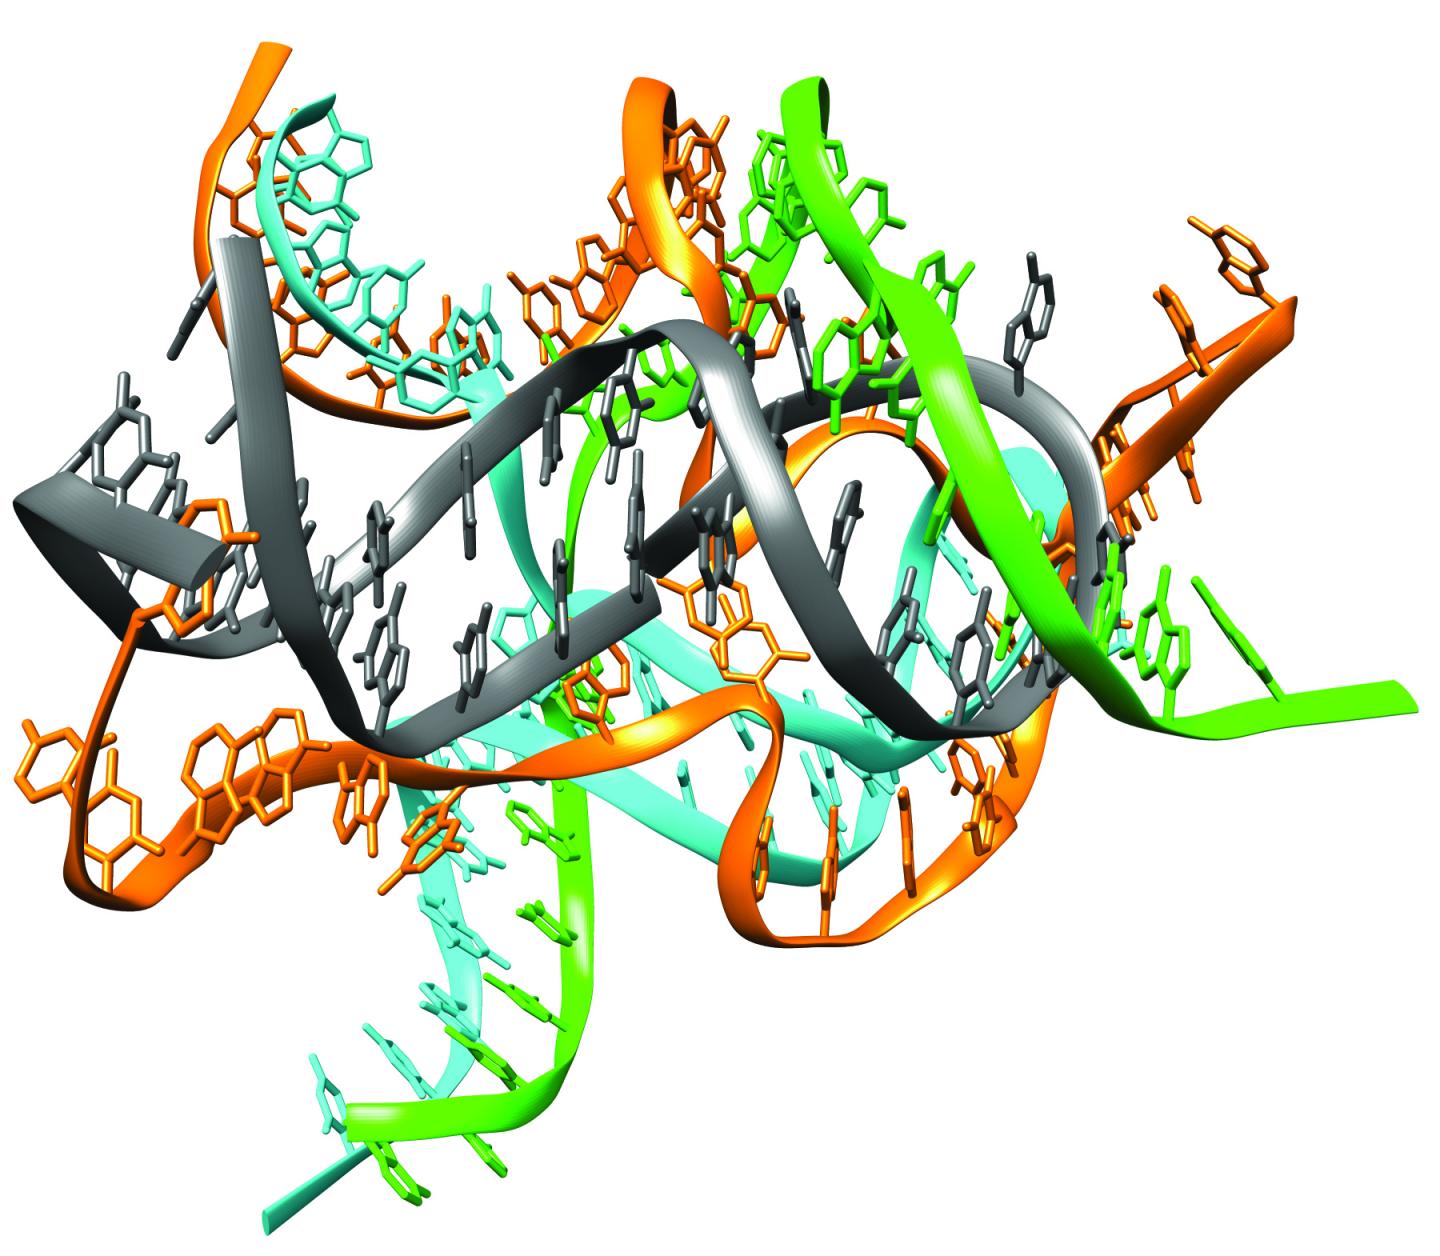 An RNA ligase ribozyme assembled from three RNA strands, each synthesized by a polymerase ribozyme.